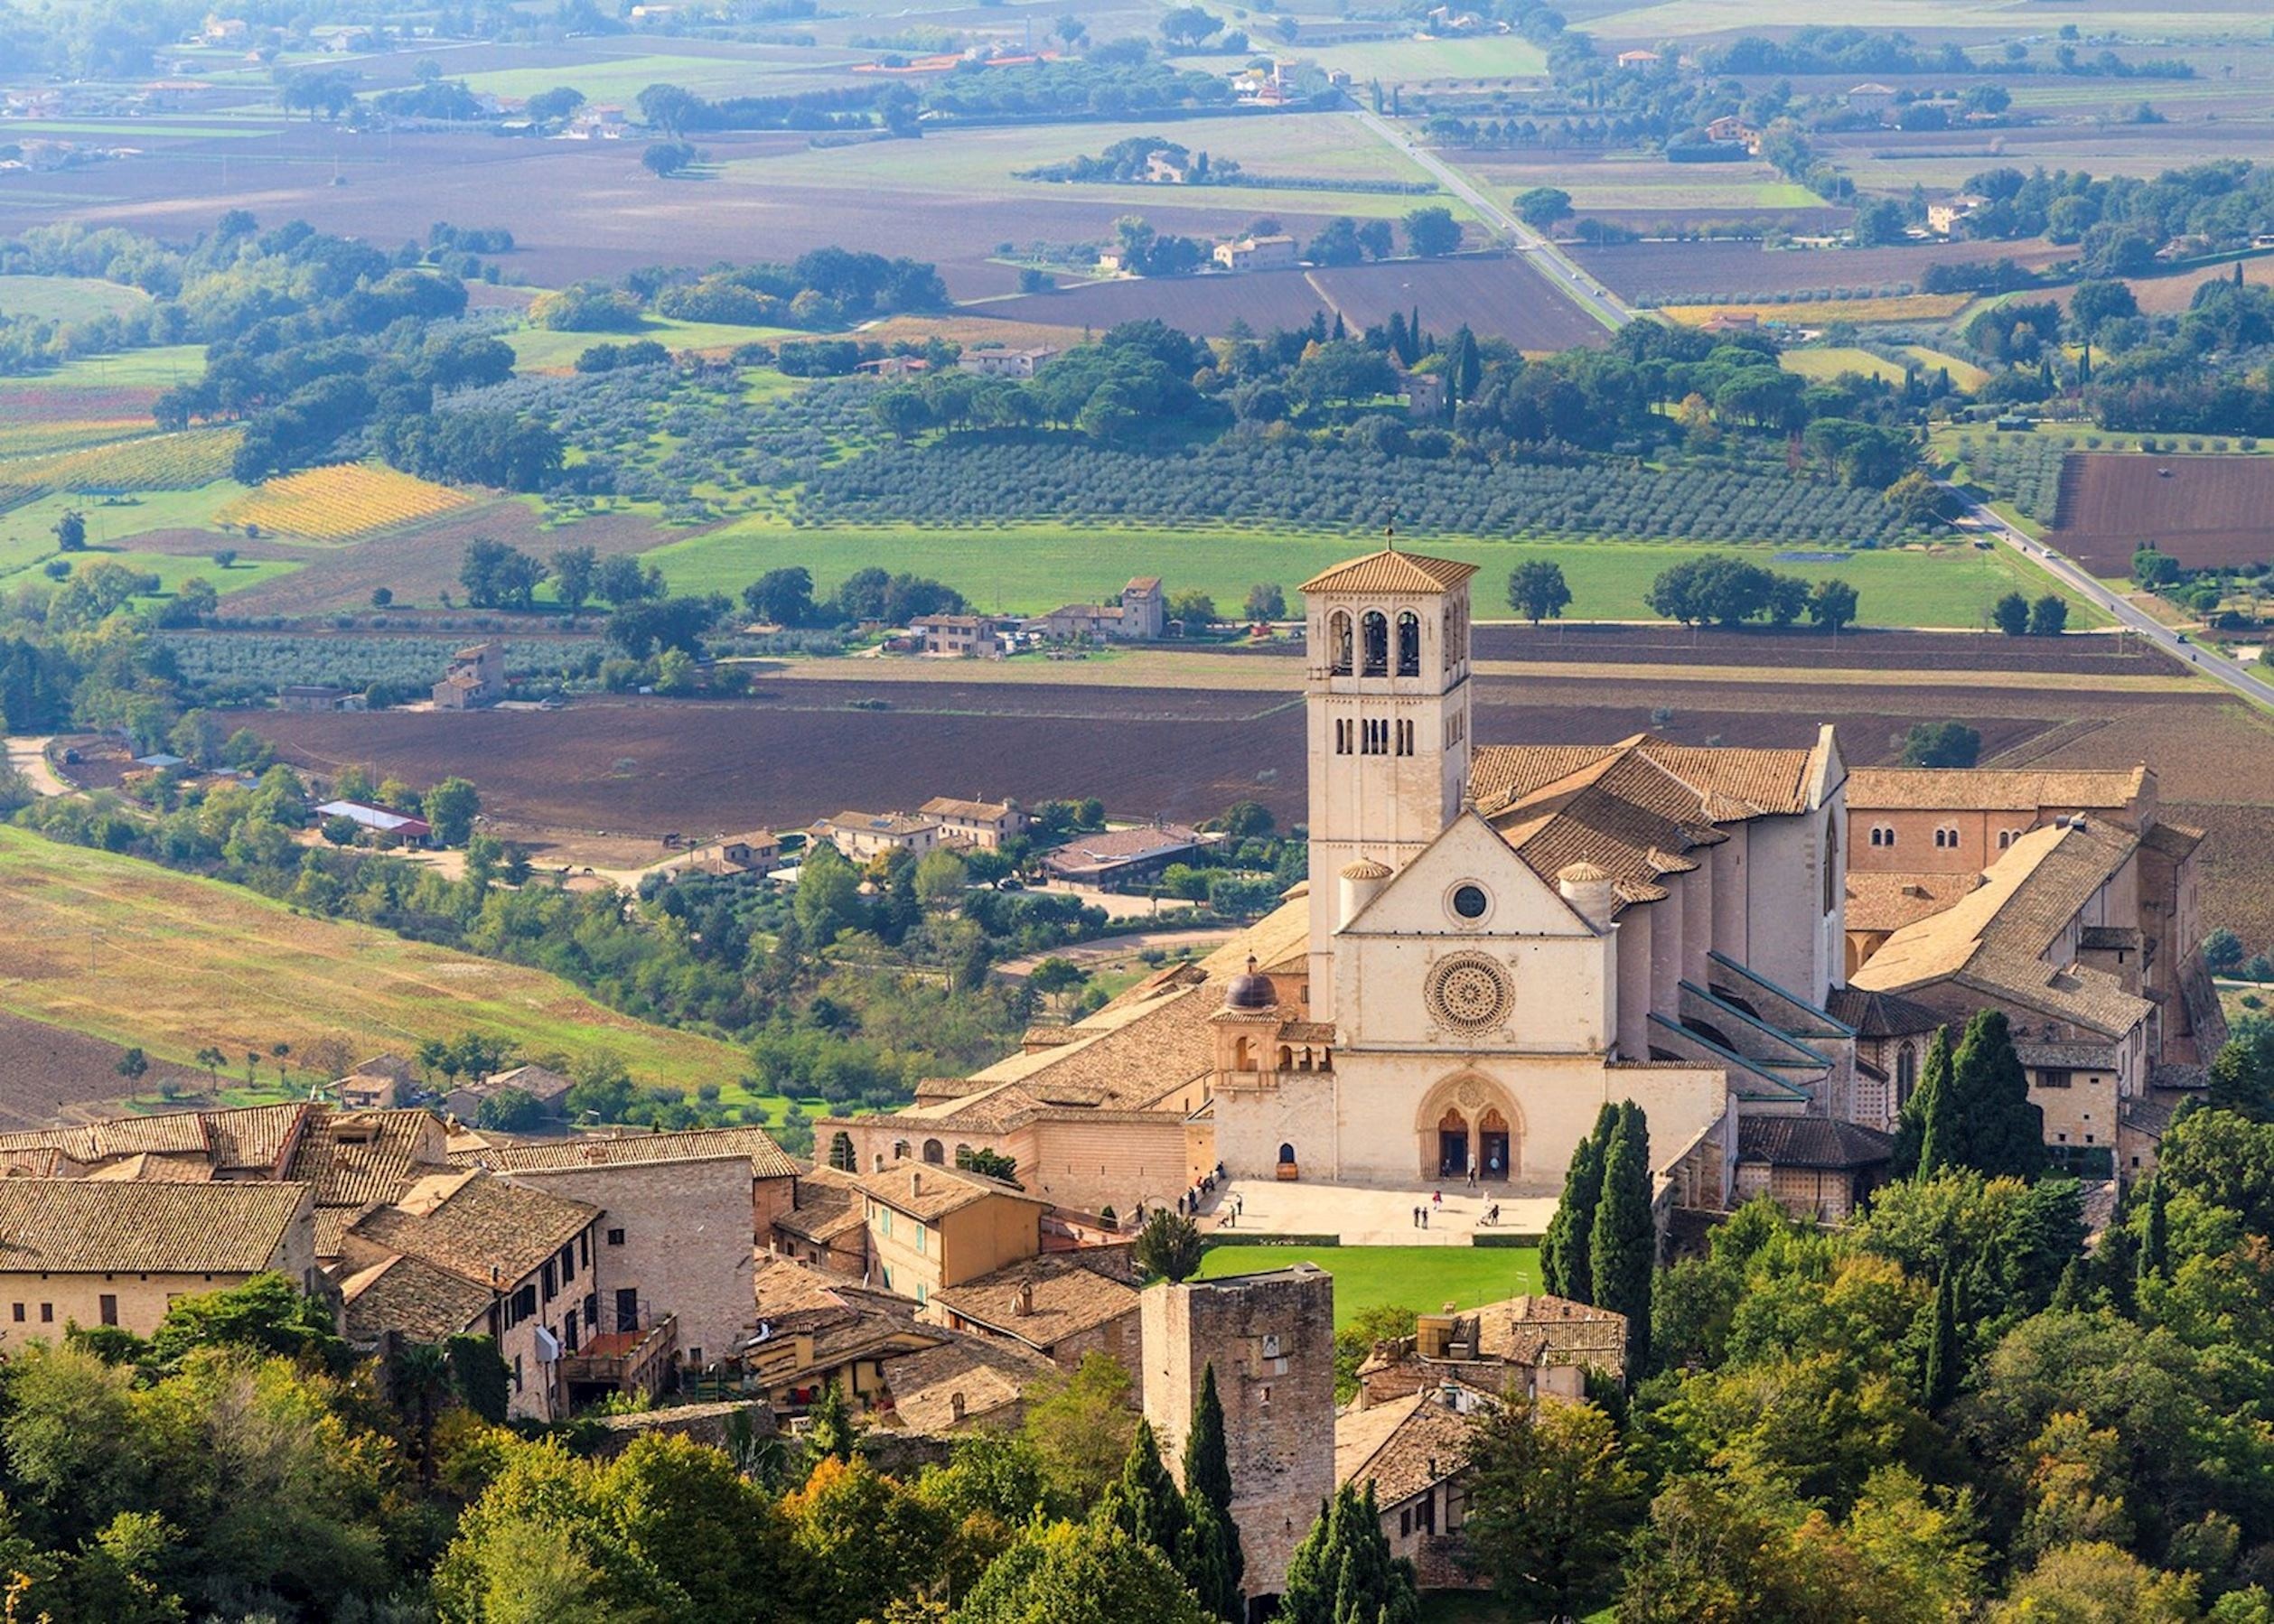 Basilica of Saint Francis of Assisi, Tailor-made vacations, Assisi exploration, Audley Travel, 2520x1800 HD Desktop